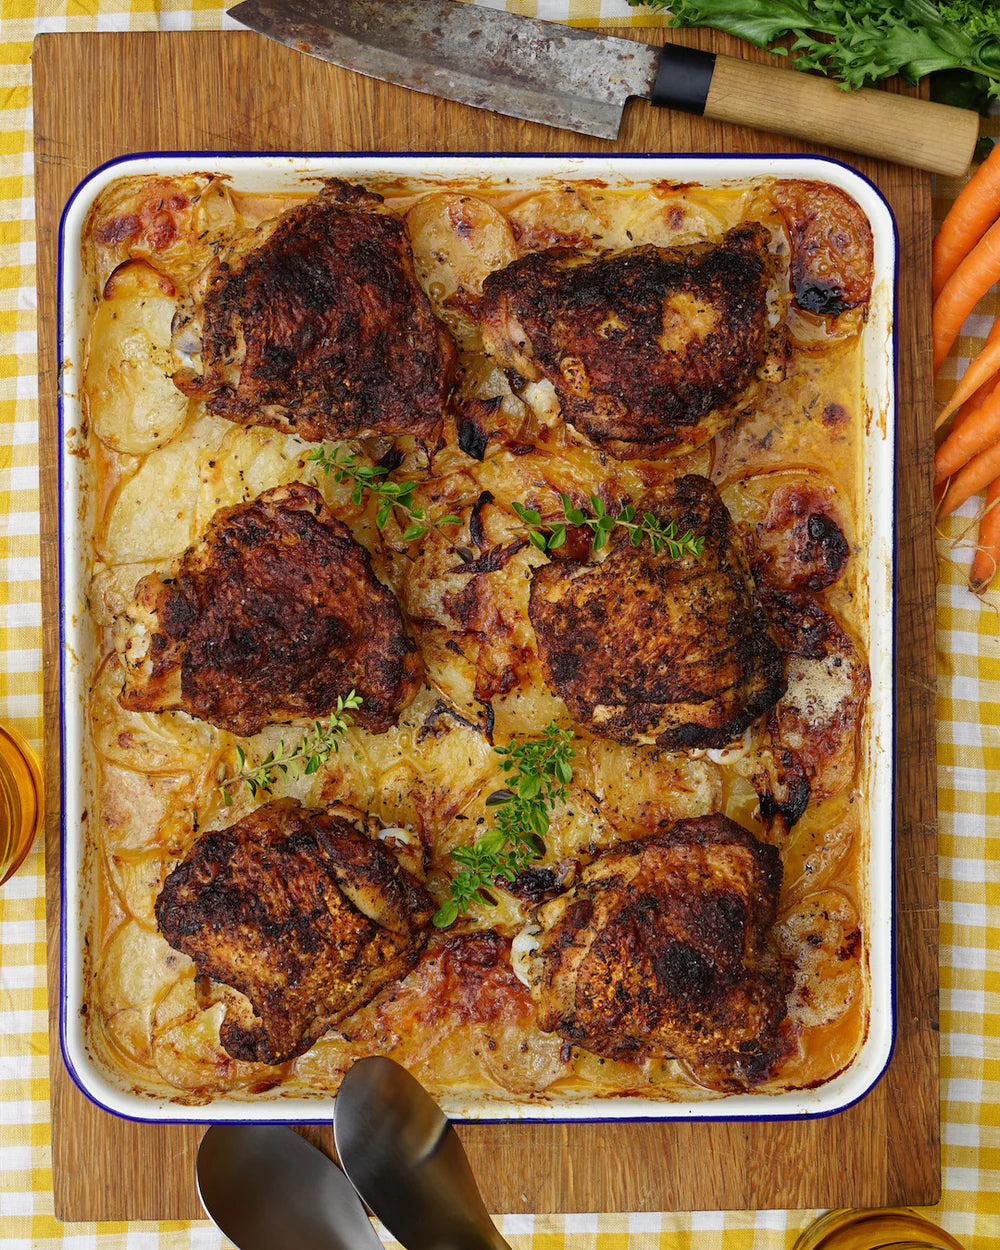 Recipes under $20 - Tray Bake Chicken and Potatoes